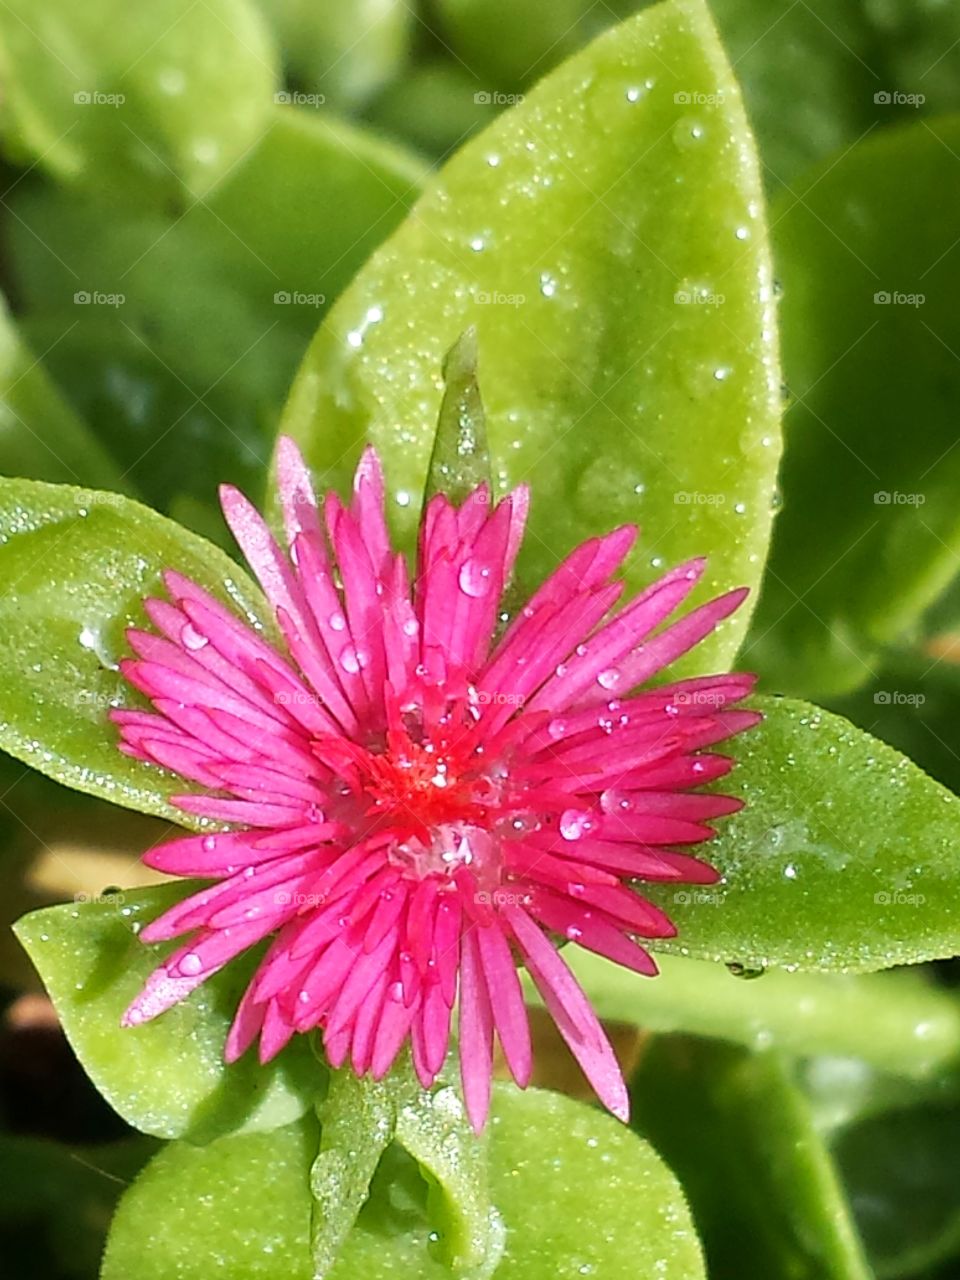 A Red Apple Succulent After Rain fall